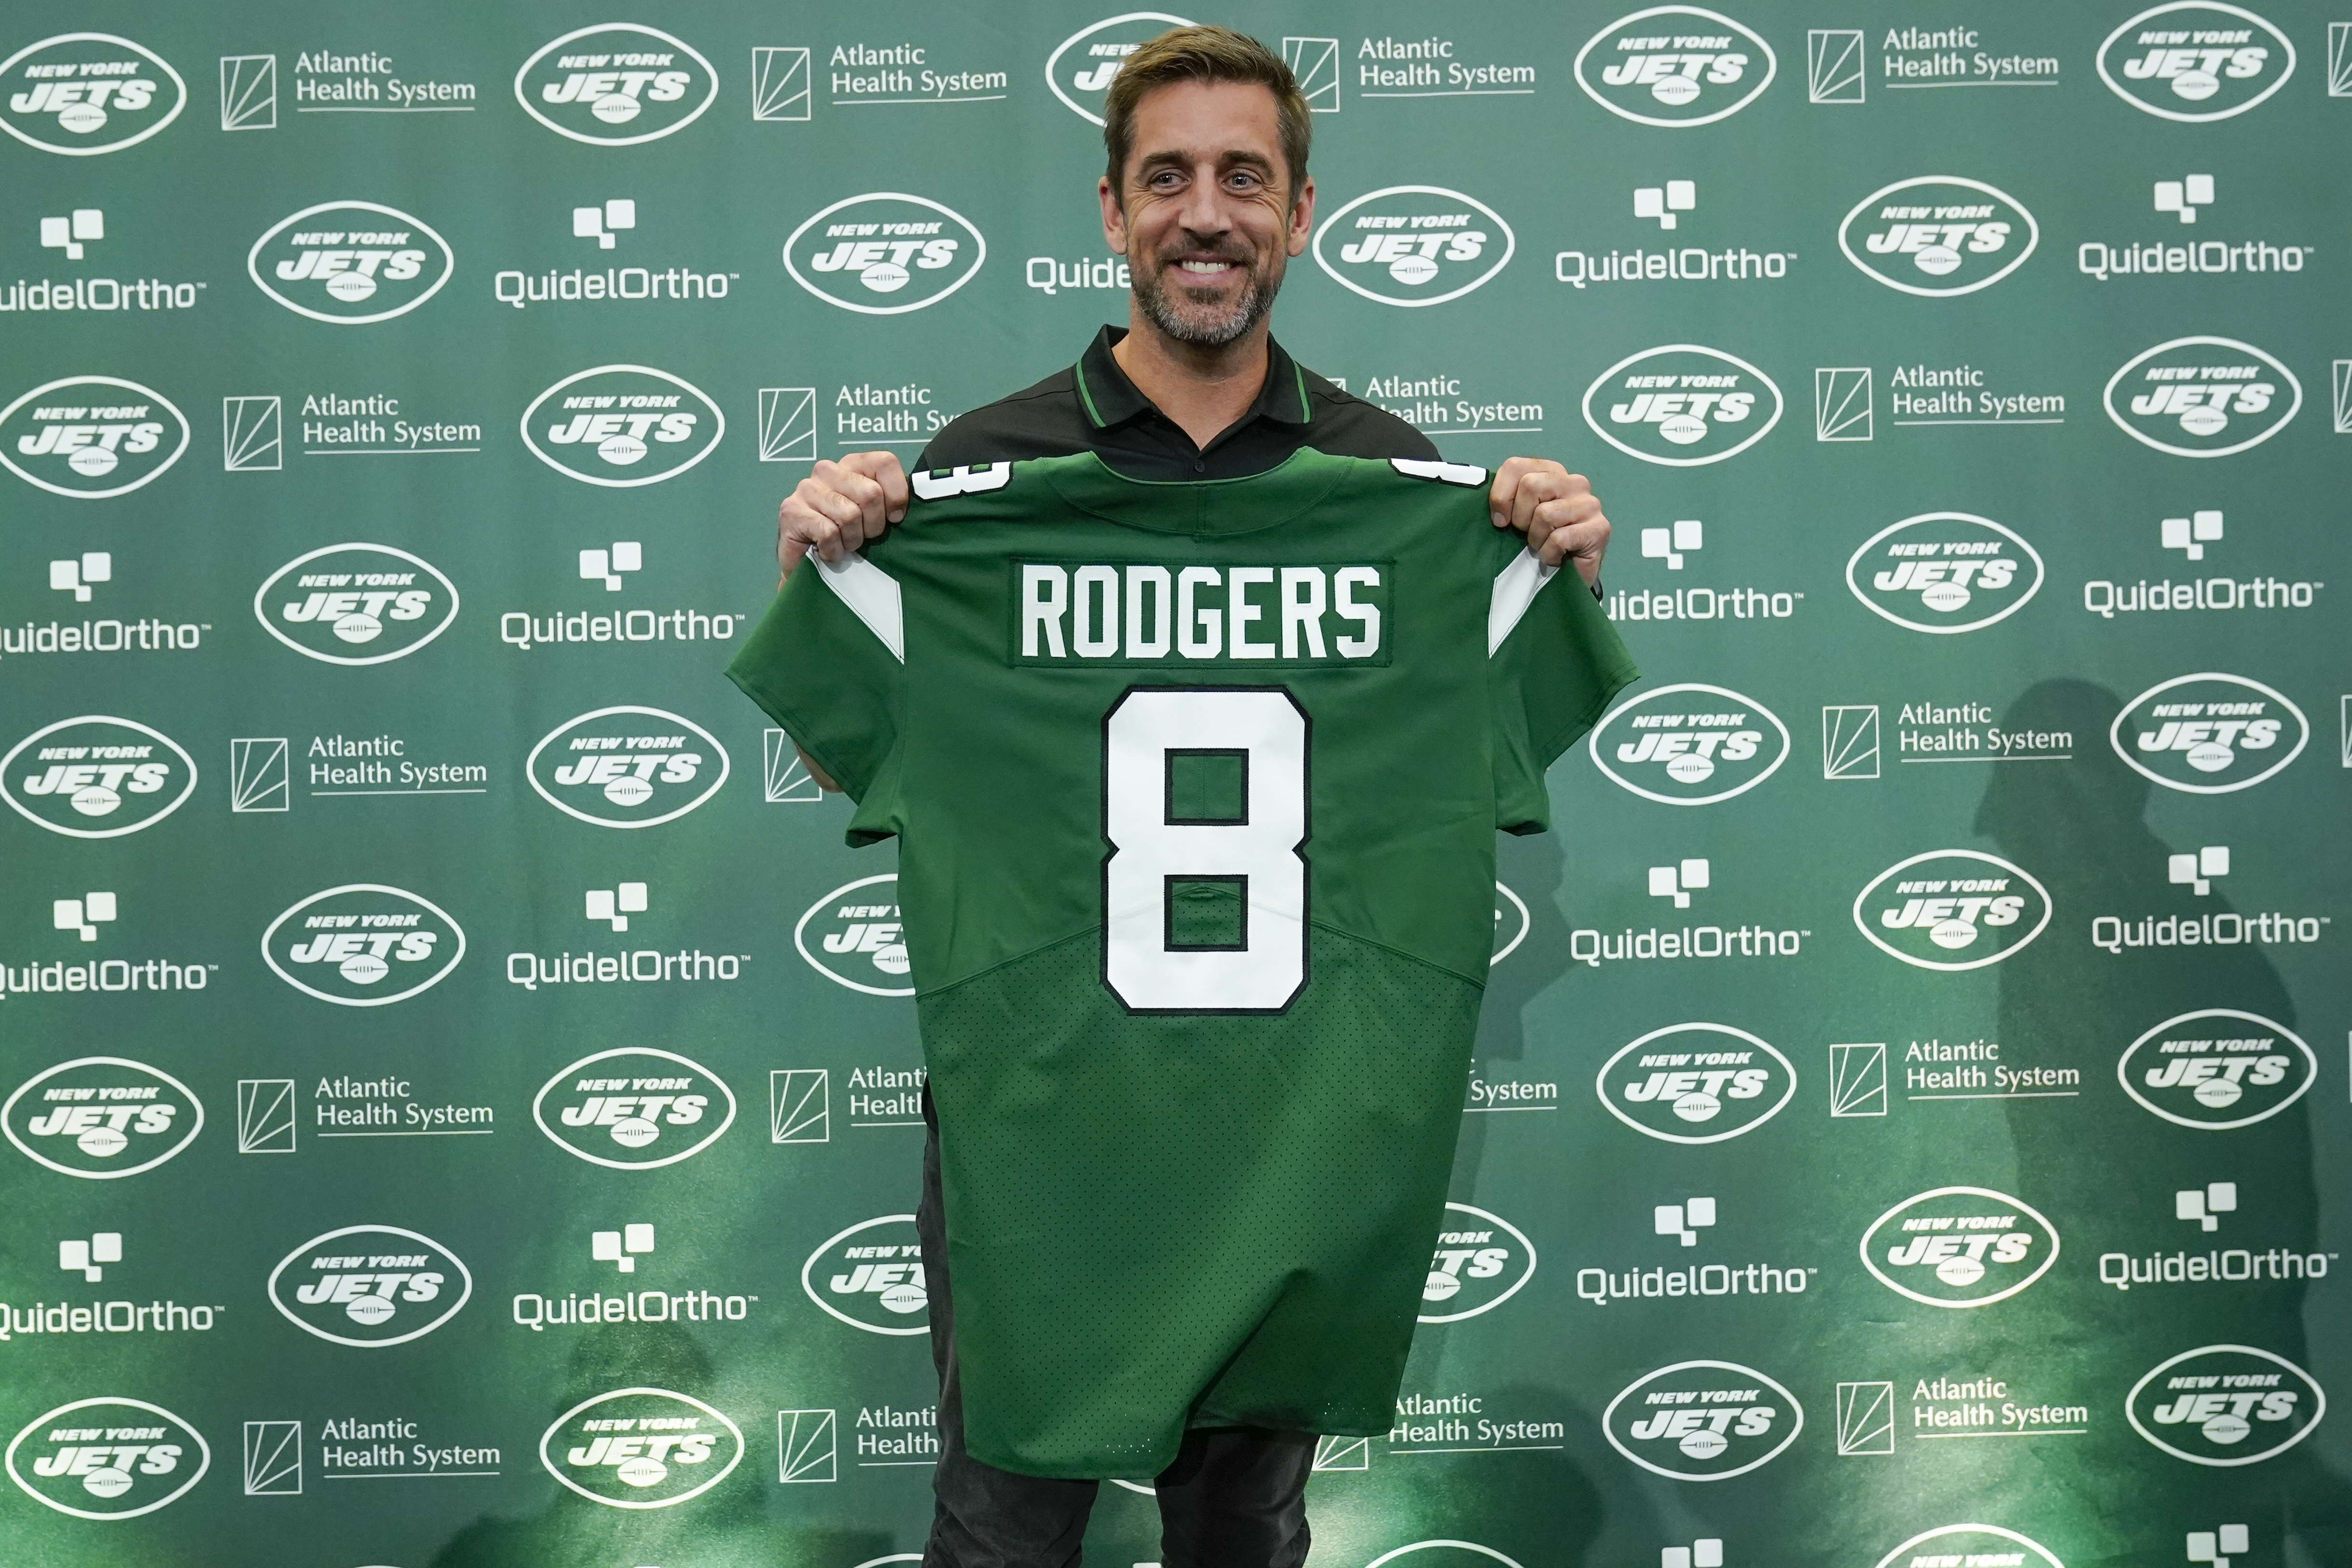 New York Jets' quarterback Aaron Rodgers poses with a jersey after a news conference at the NFL football team's training facility in Florham Park, N.J., Wednesday, April 26, 2023. (AP Photo/Seth Wenig)